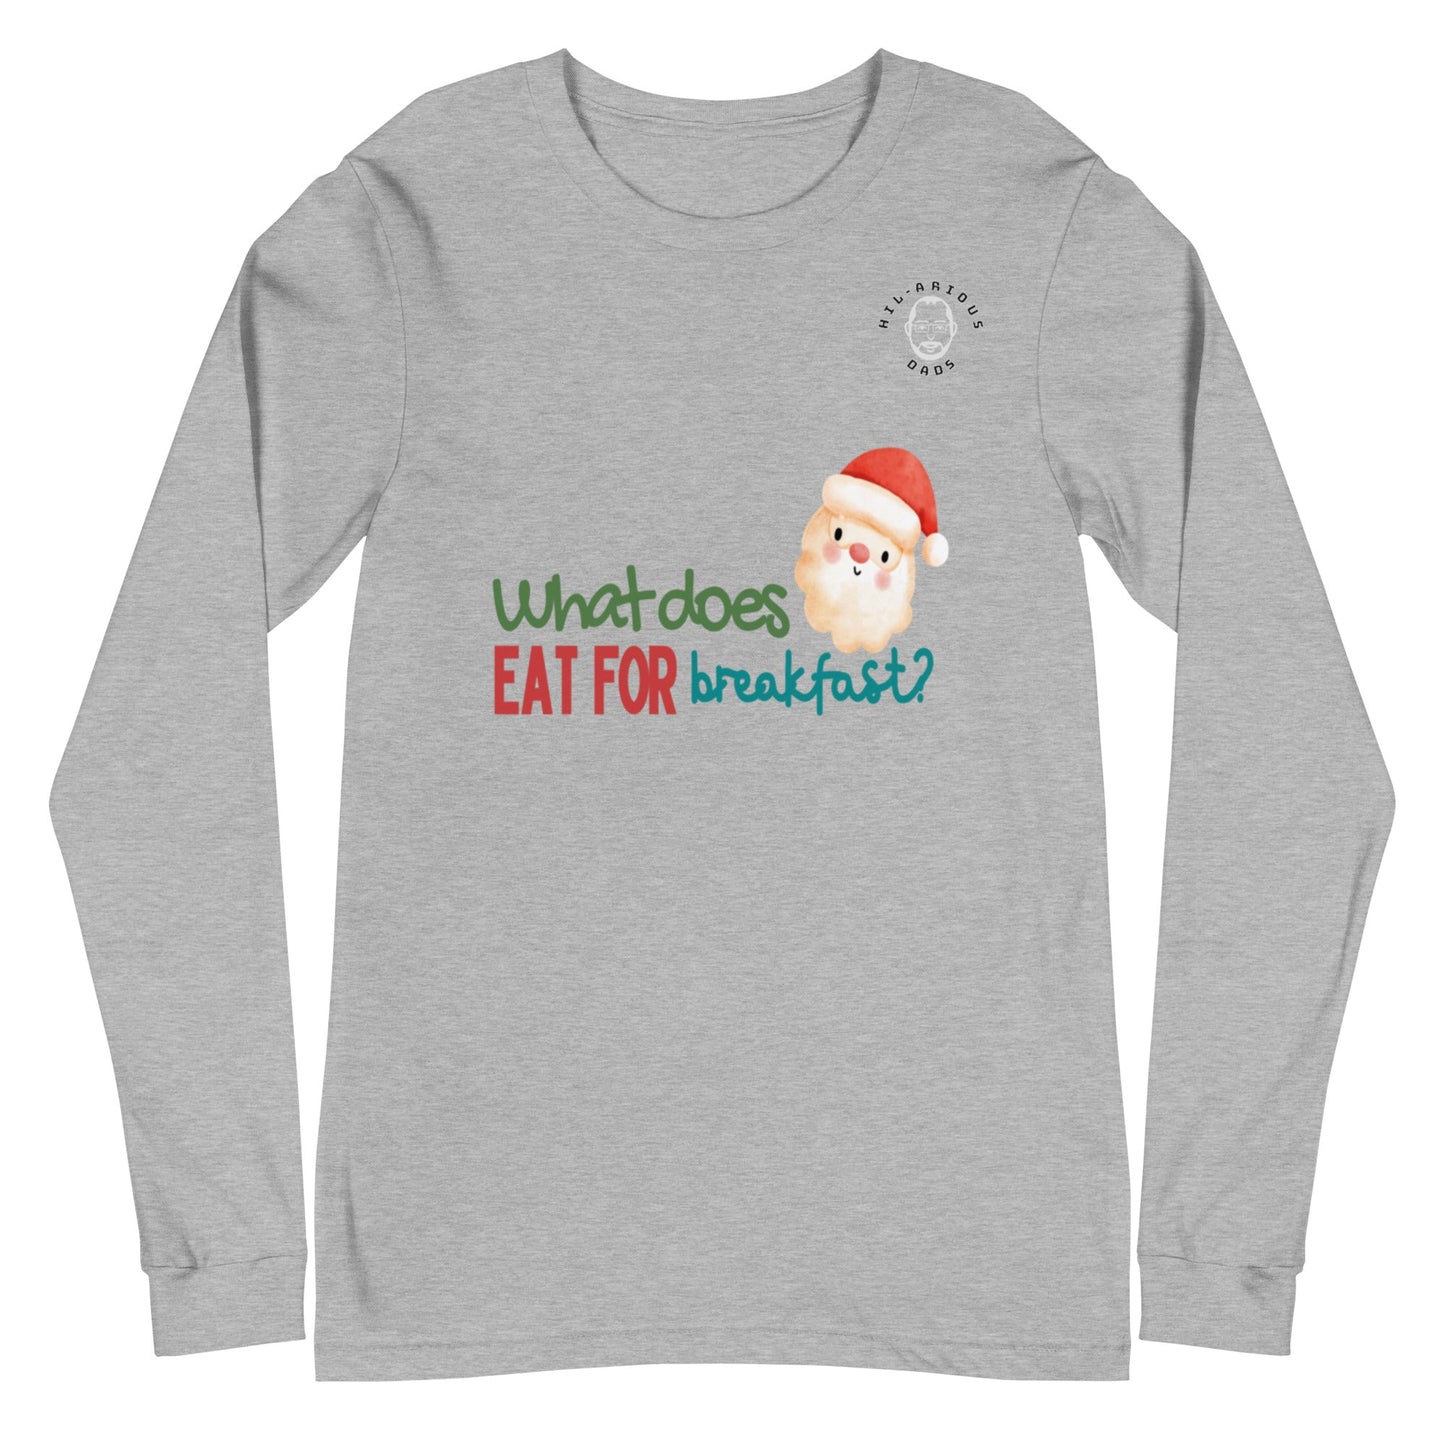 What does Santa eat for breakfast?-Long Sleeve Tee - Hil-arious Dads